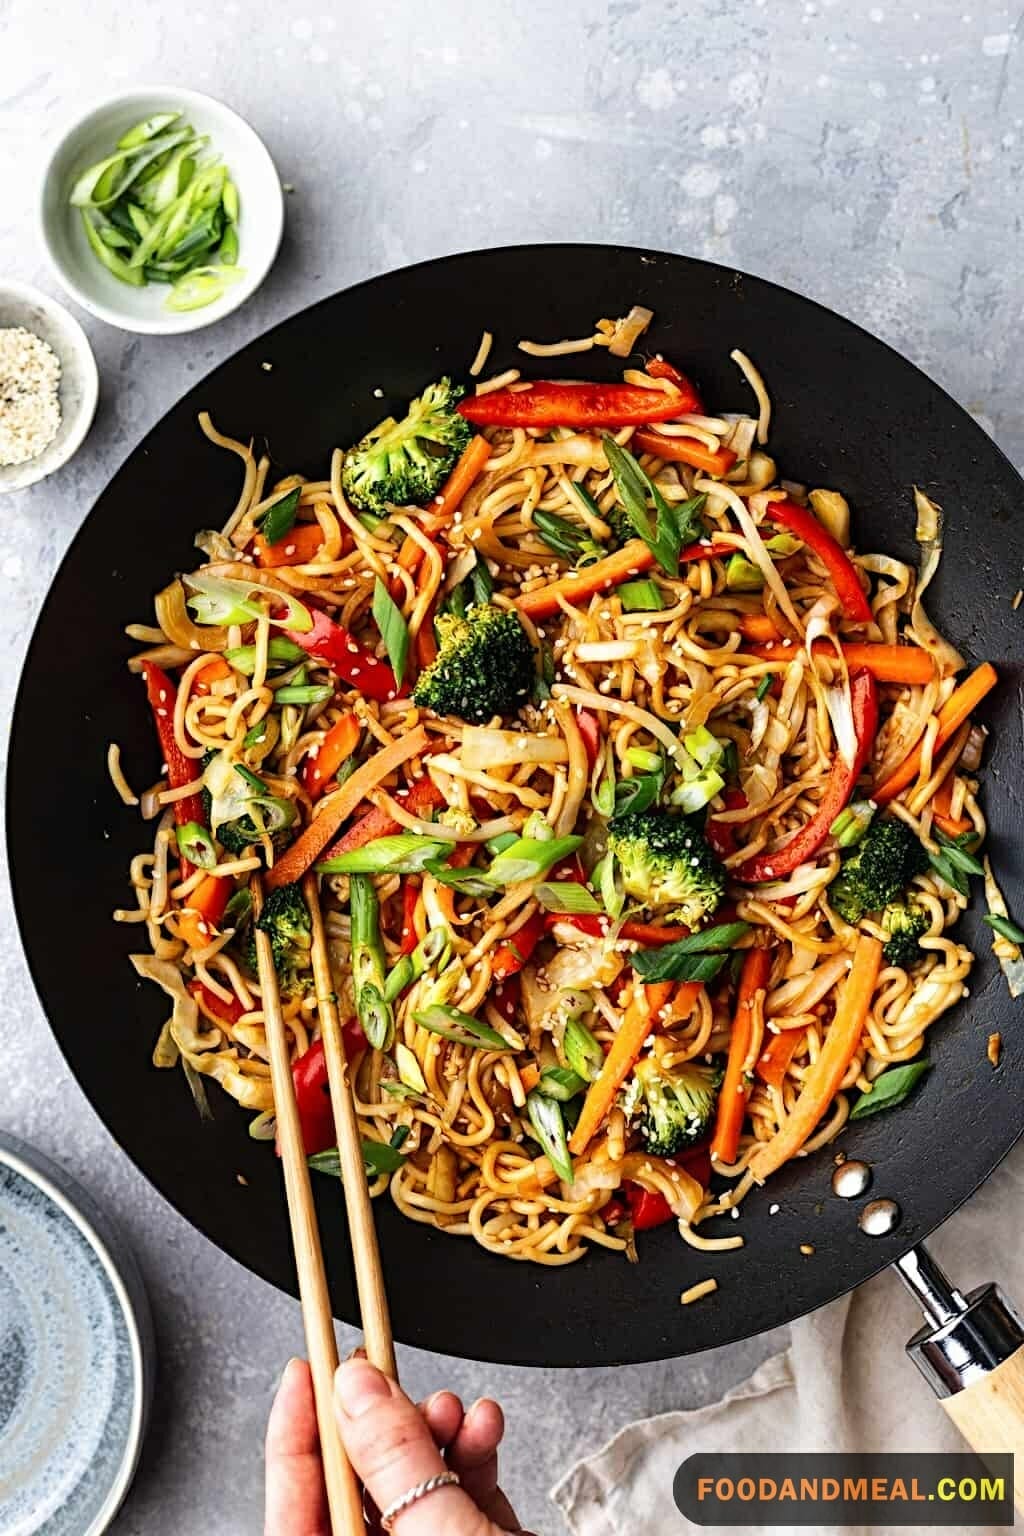 How To Make Vegetable Lo Mein Like Chinese Restaurants